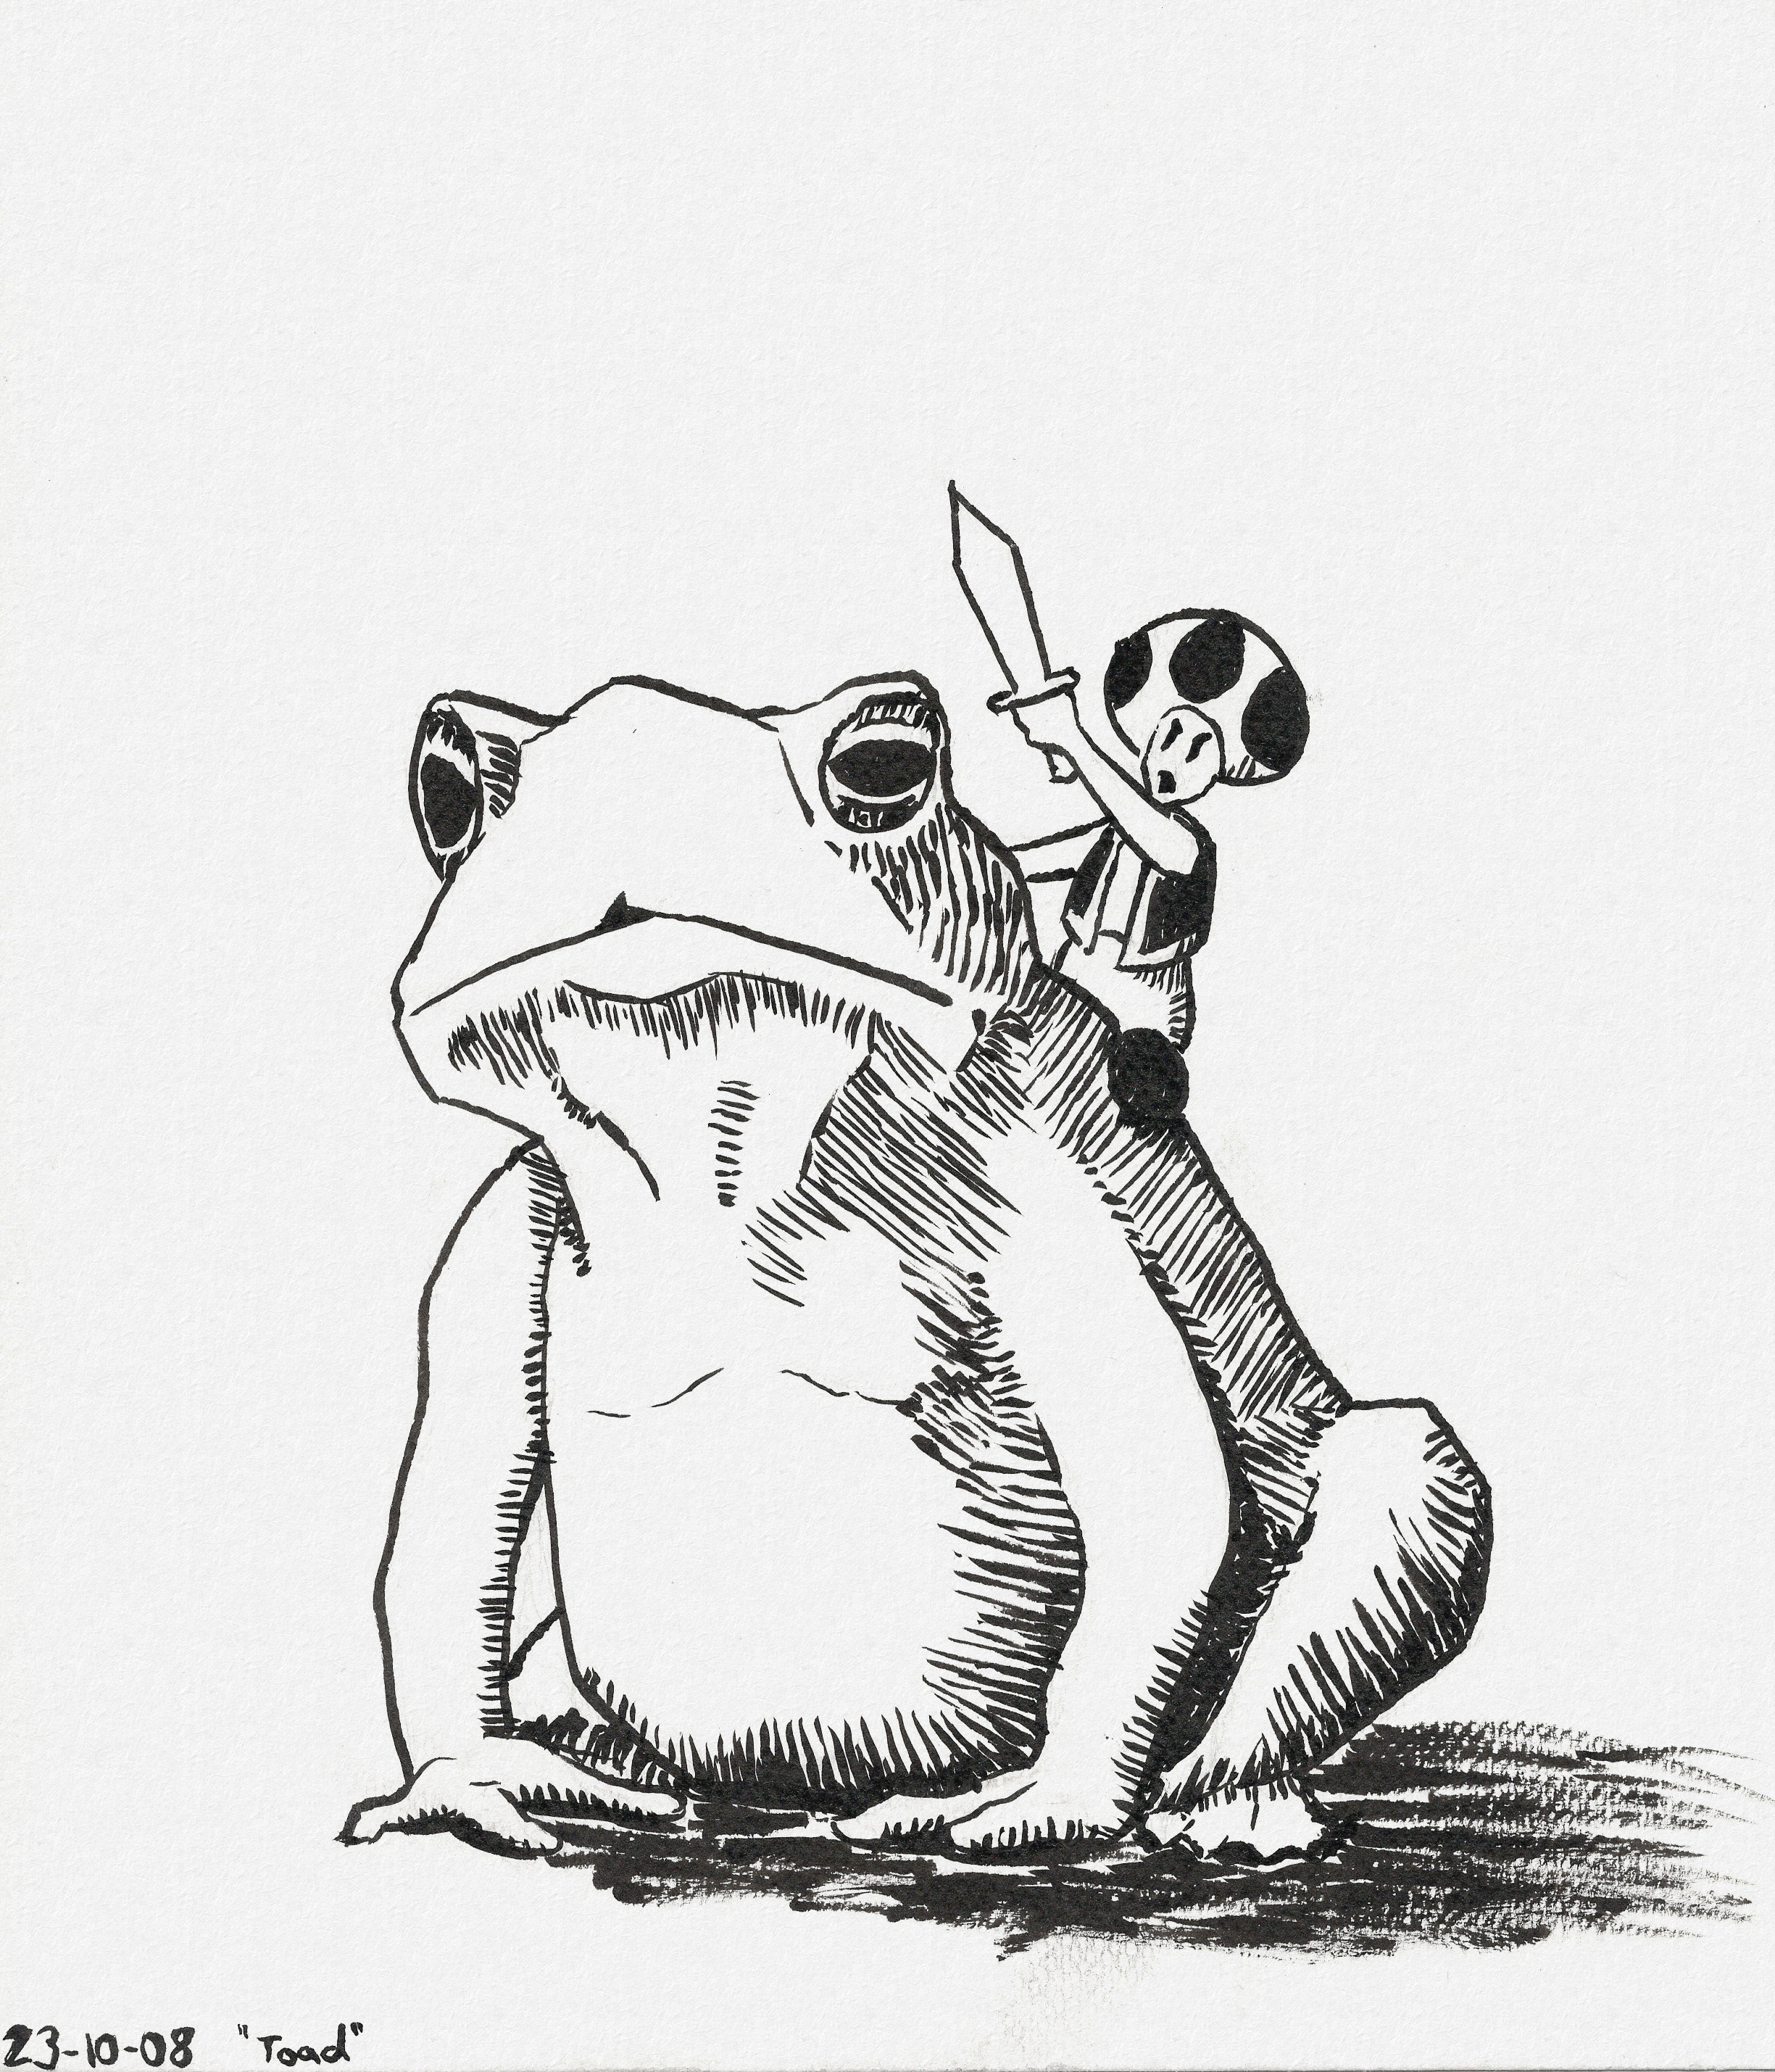 Toad (the character from Super Mario)
riding a toad (the animal from real life) and holding up a little sword.